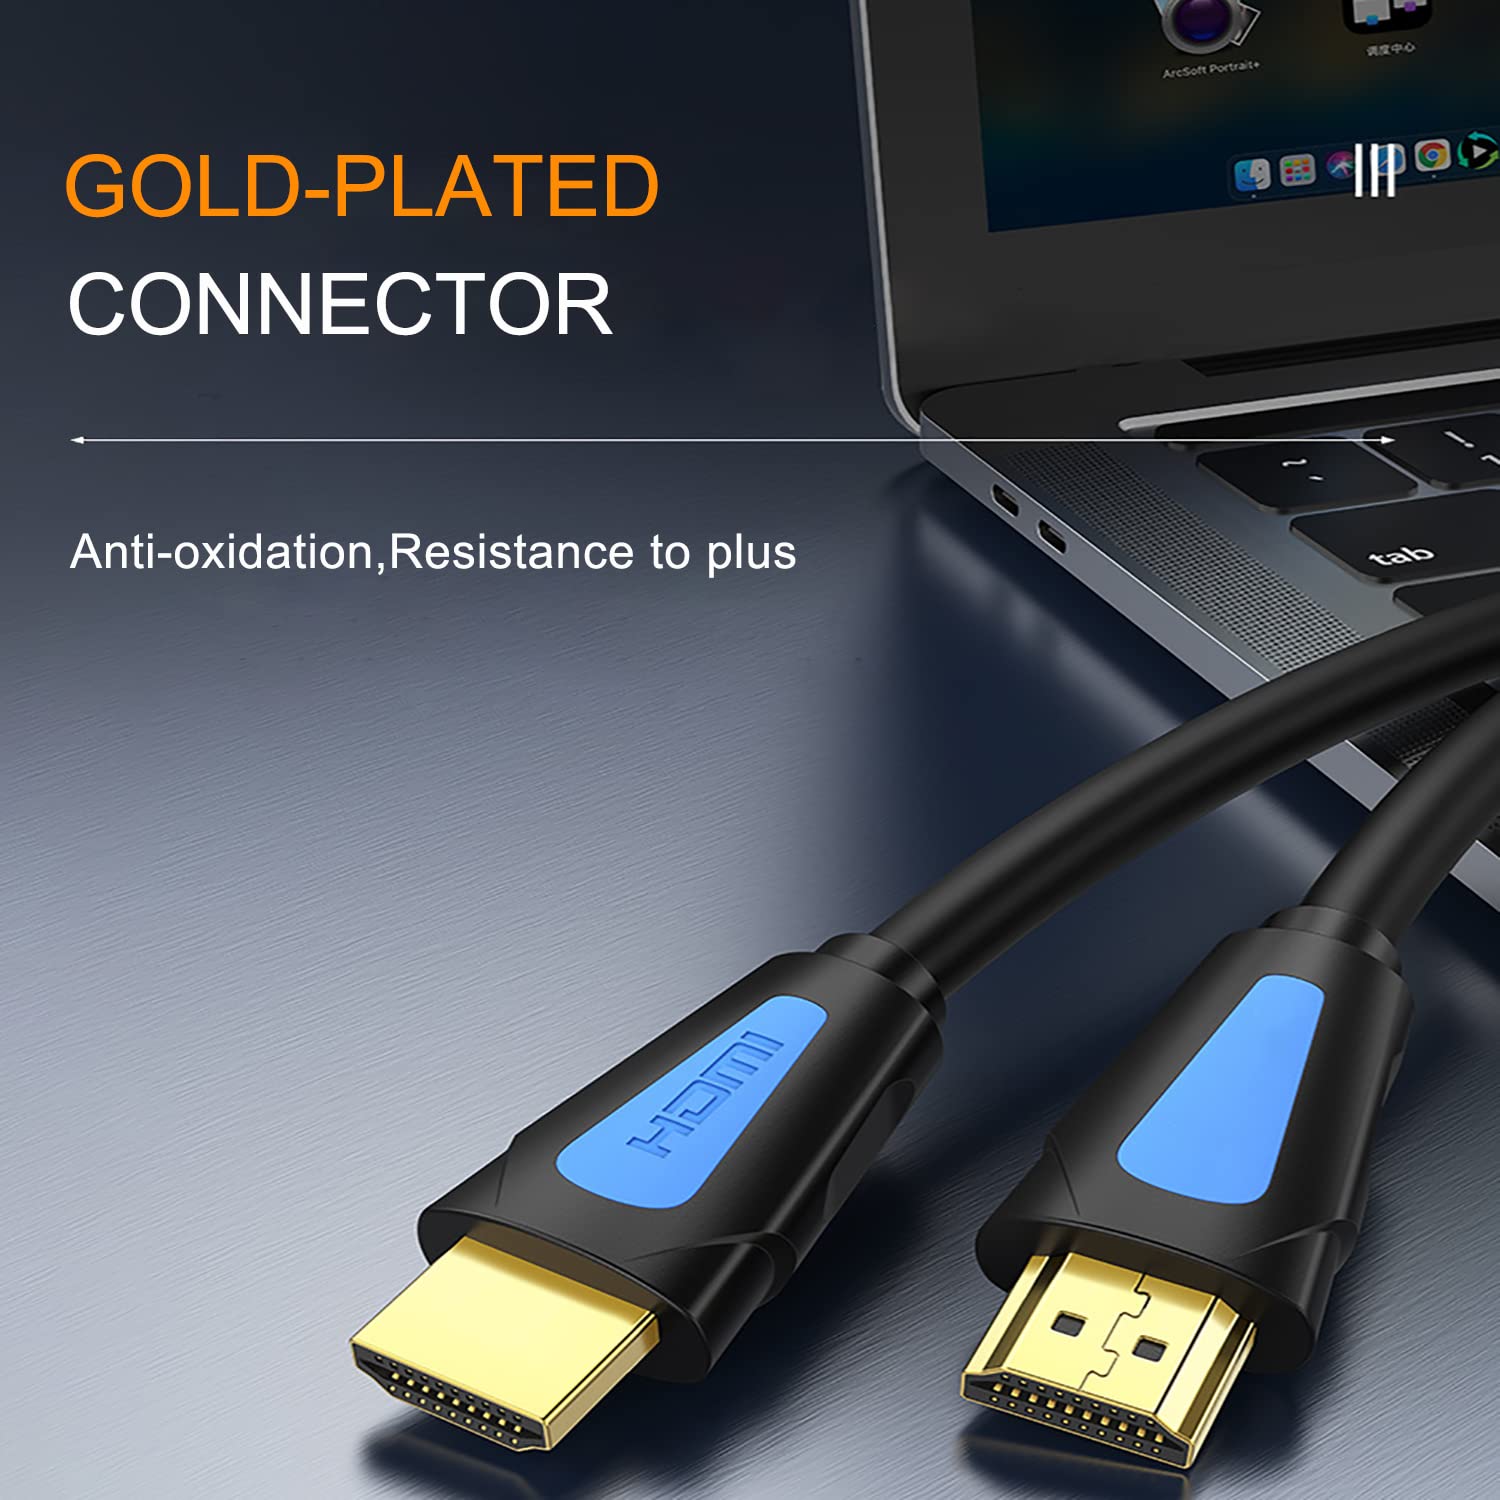 Great Choice Products Hdmi Cable 15 Ft,2.0 Hdmi 15 Feet Gold-Plated Supports 4K@60Hz,18Gbps,Hdr,Arc,Ultra Hd,3D,1080P.